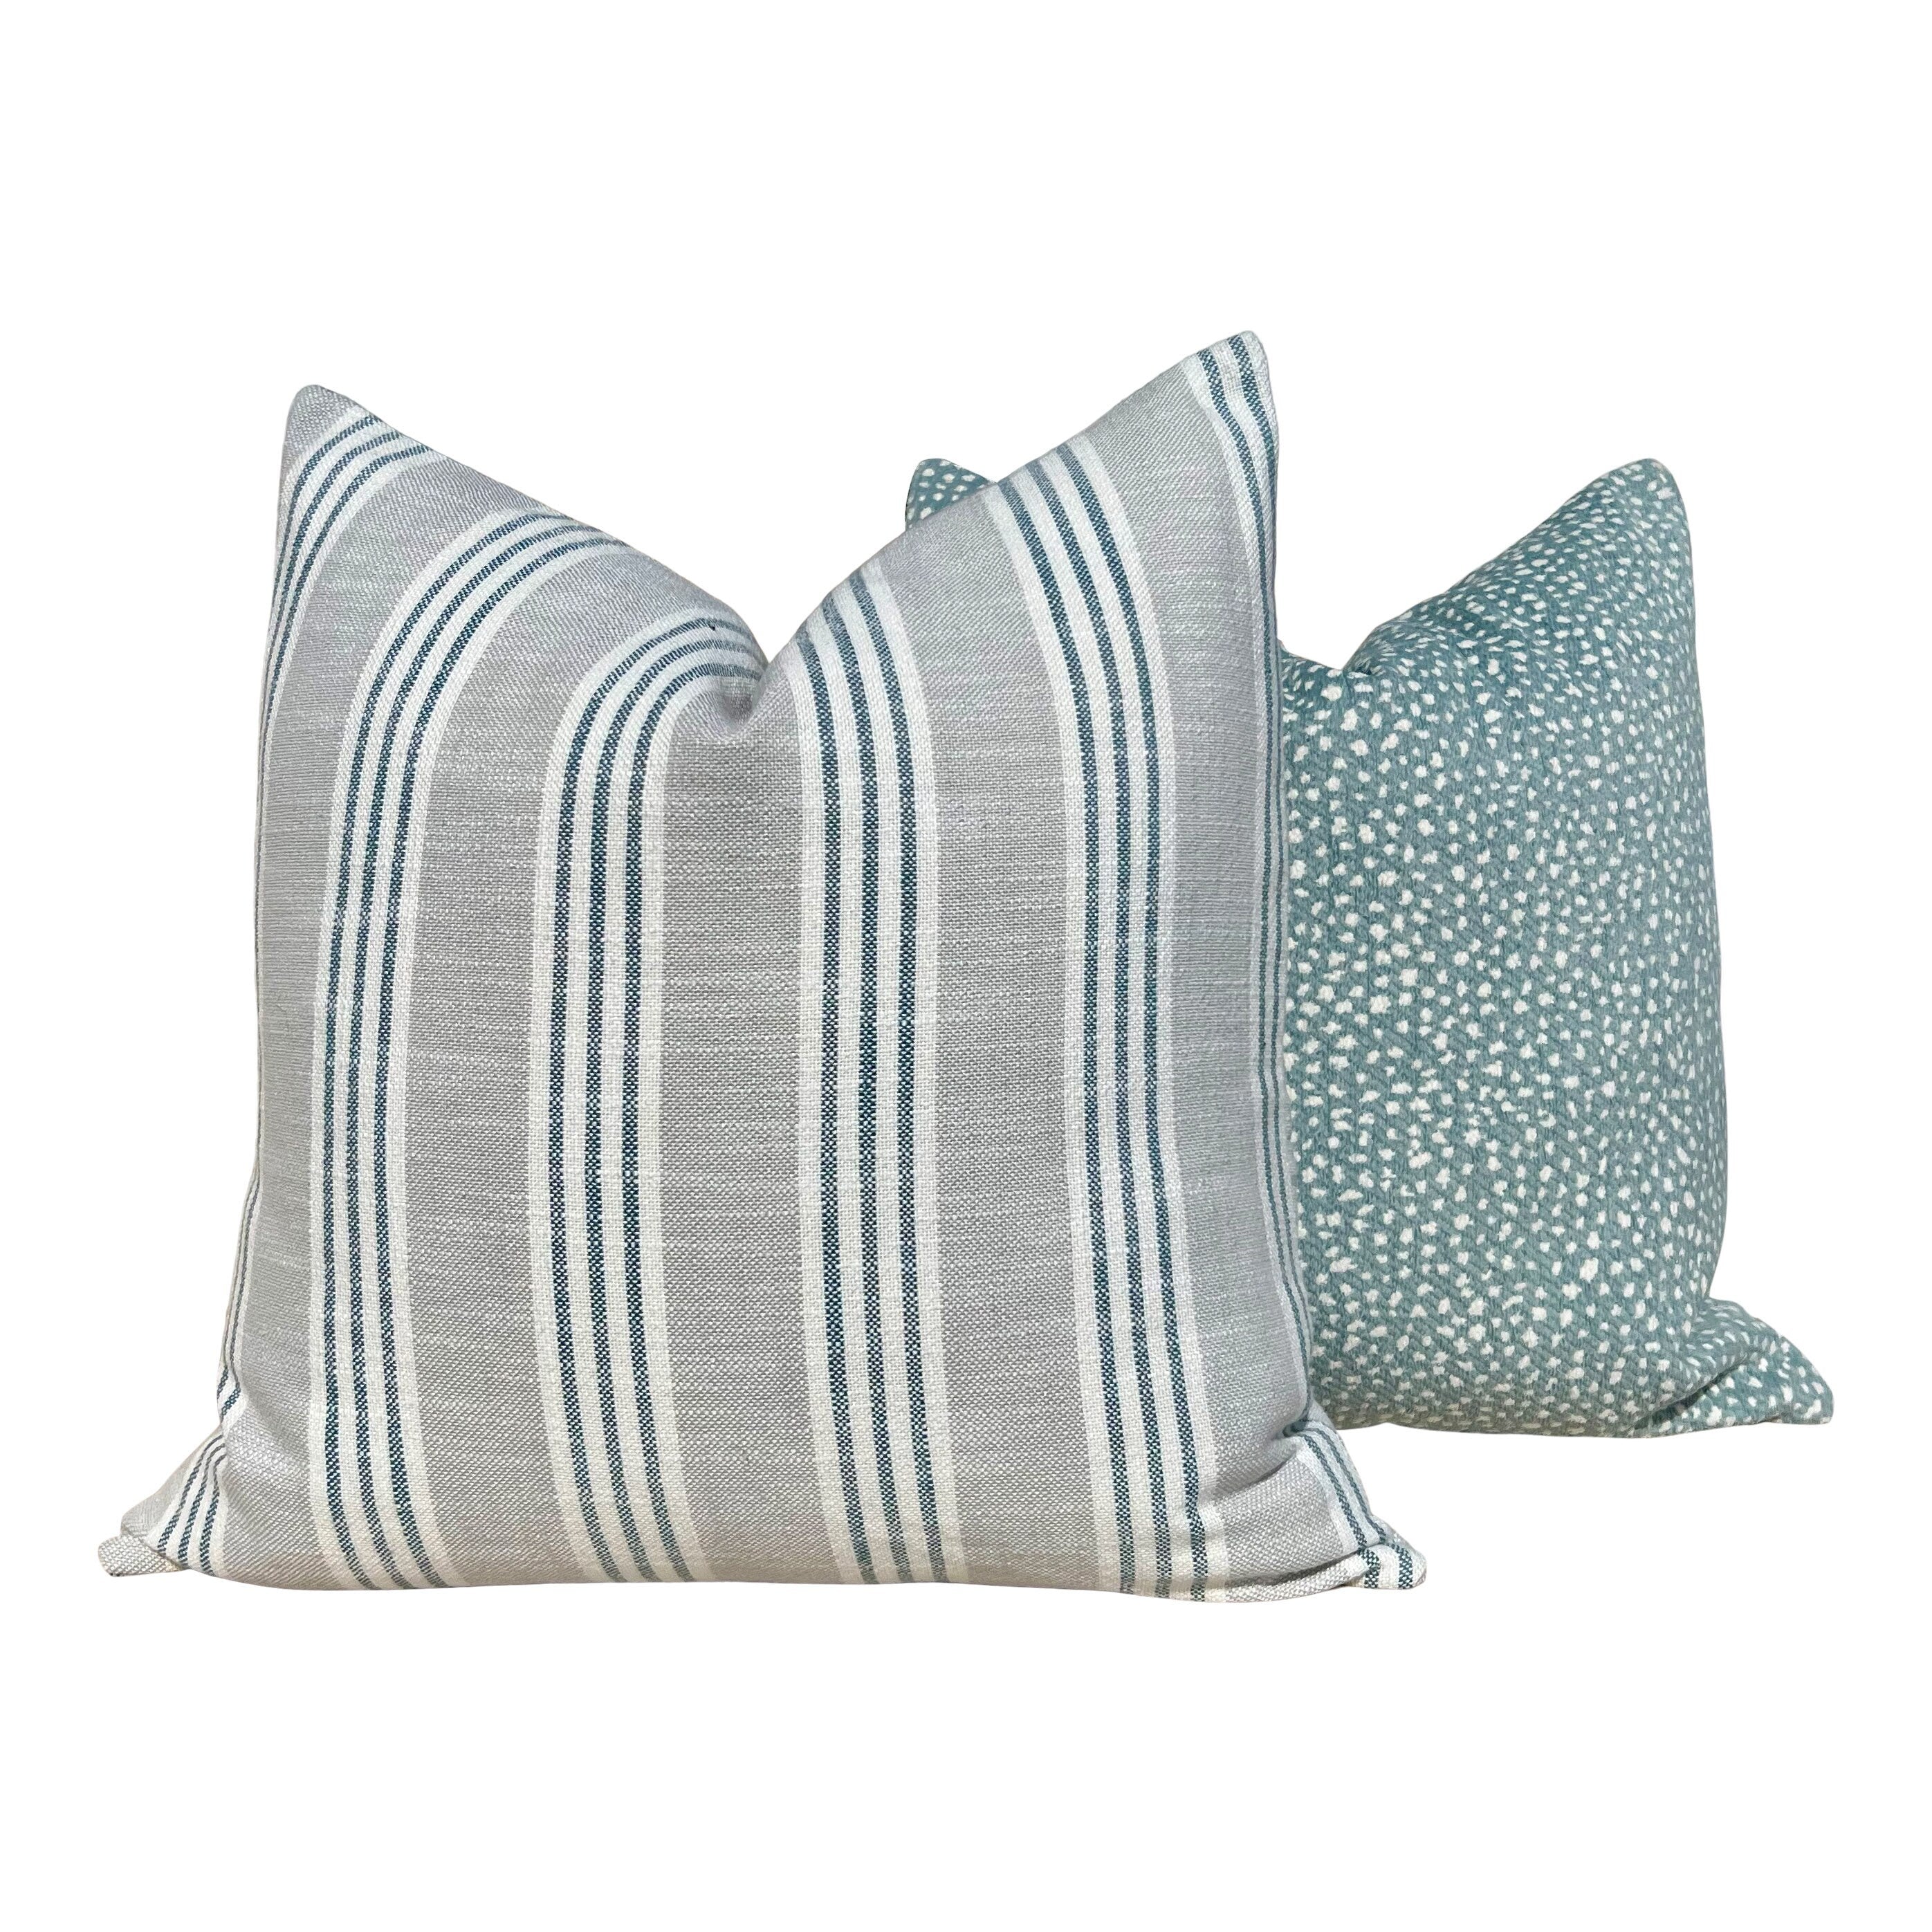 Thibaut Indoor/Outdoor Woven Southport Stripe Pillow in Sterling and Cobalt. Outdoor Gray Striped Pillow Covers, Accent Lumbar Pillows